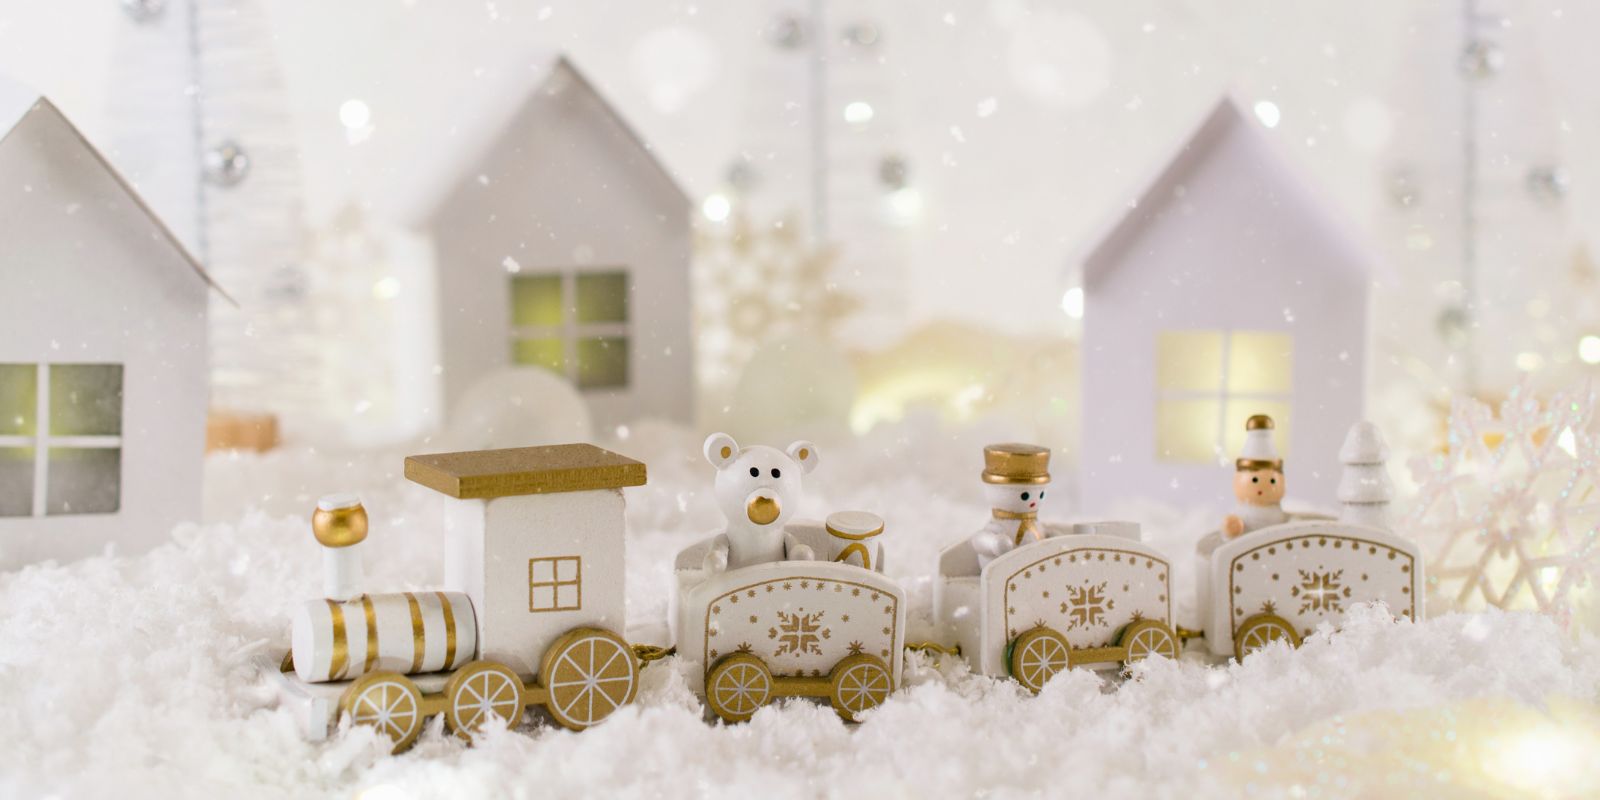 A winter landscape showing a train of toys and a village with twinkle lights in the background.